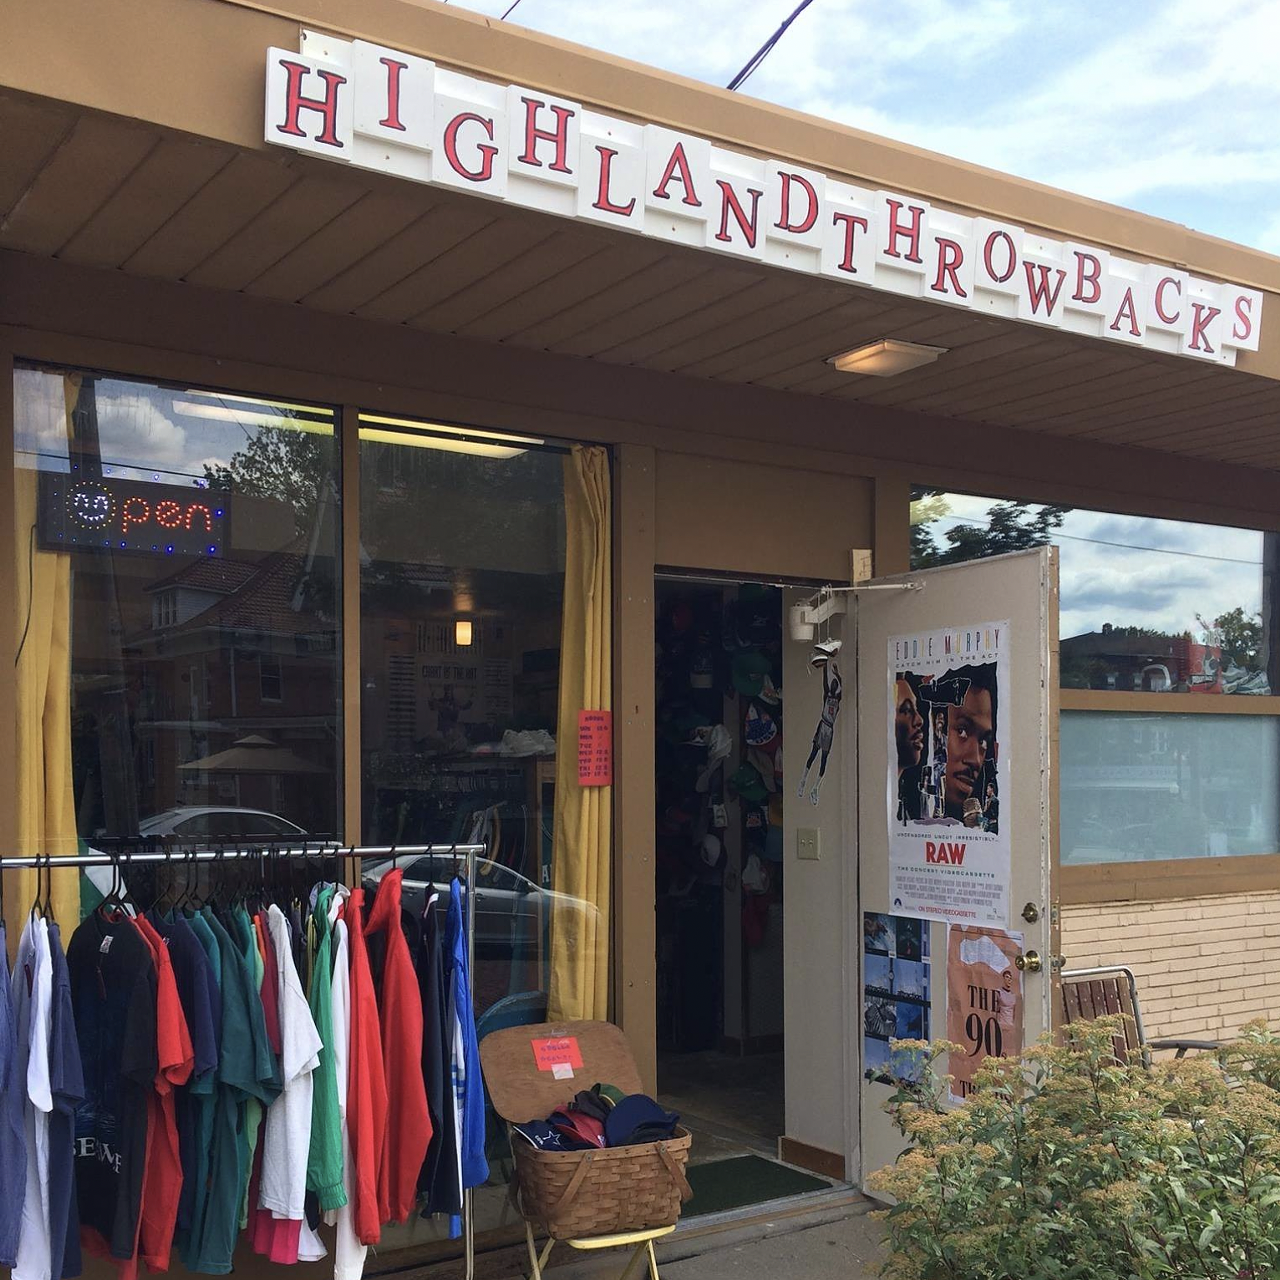 Go Vintage Shopping
Whether it's clothing, furniture, home goods, toys or oddities, there are a ton of great vintage shops around Cleveland that make for a fun day. Check out our list of 25 favorites here.